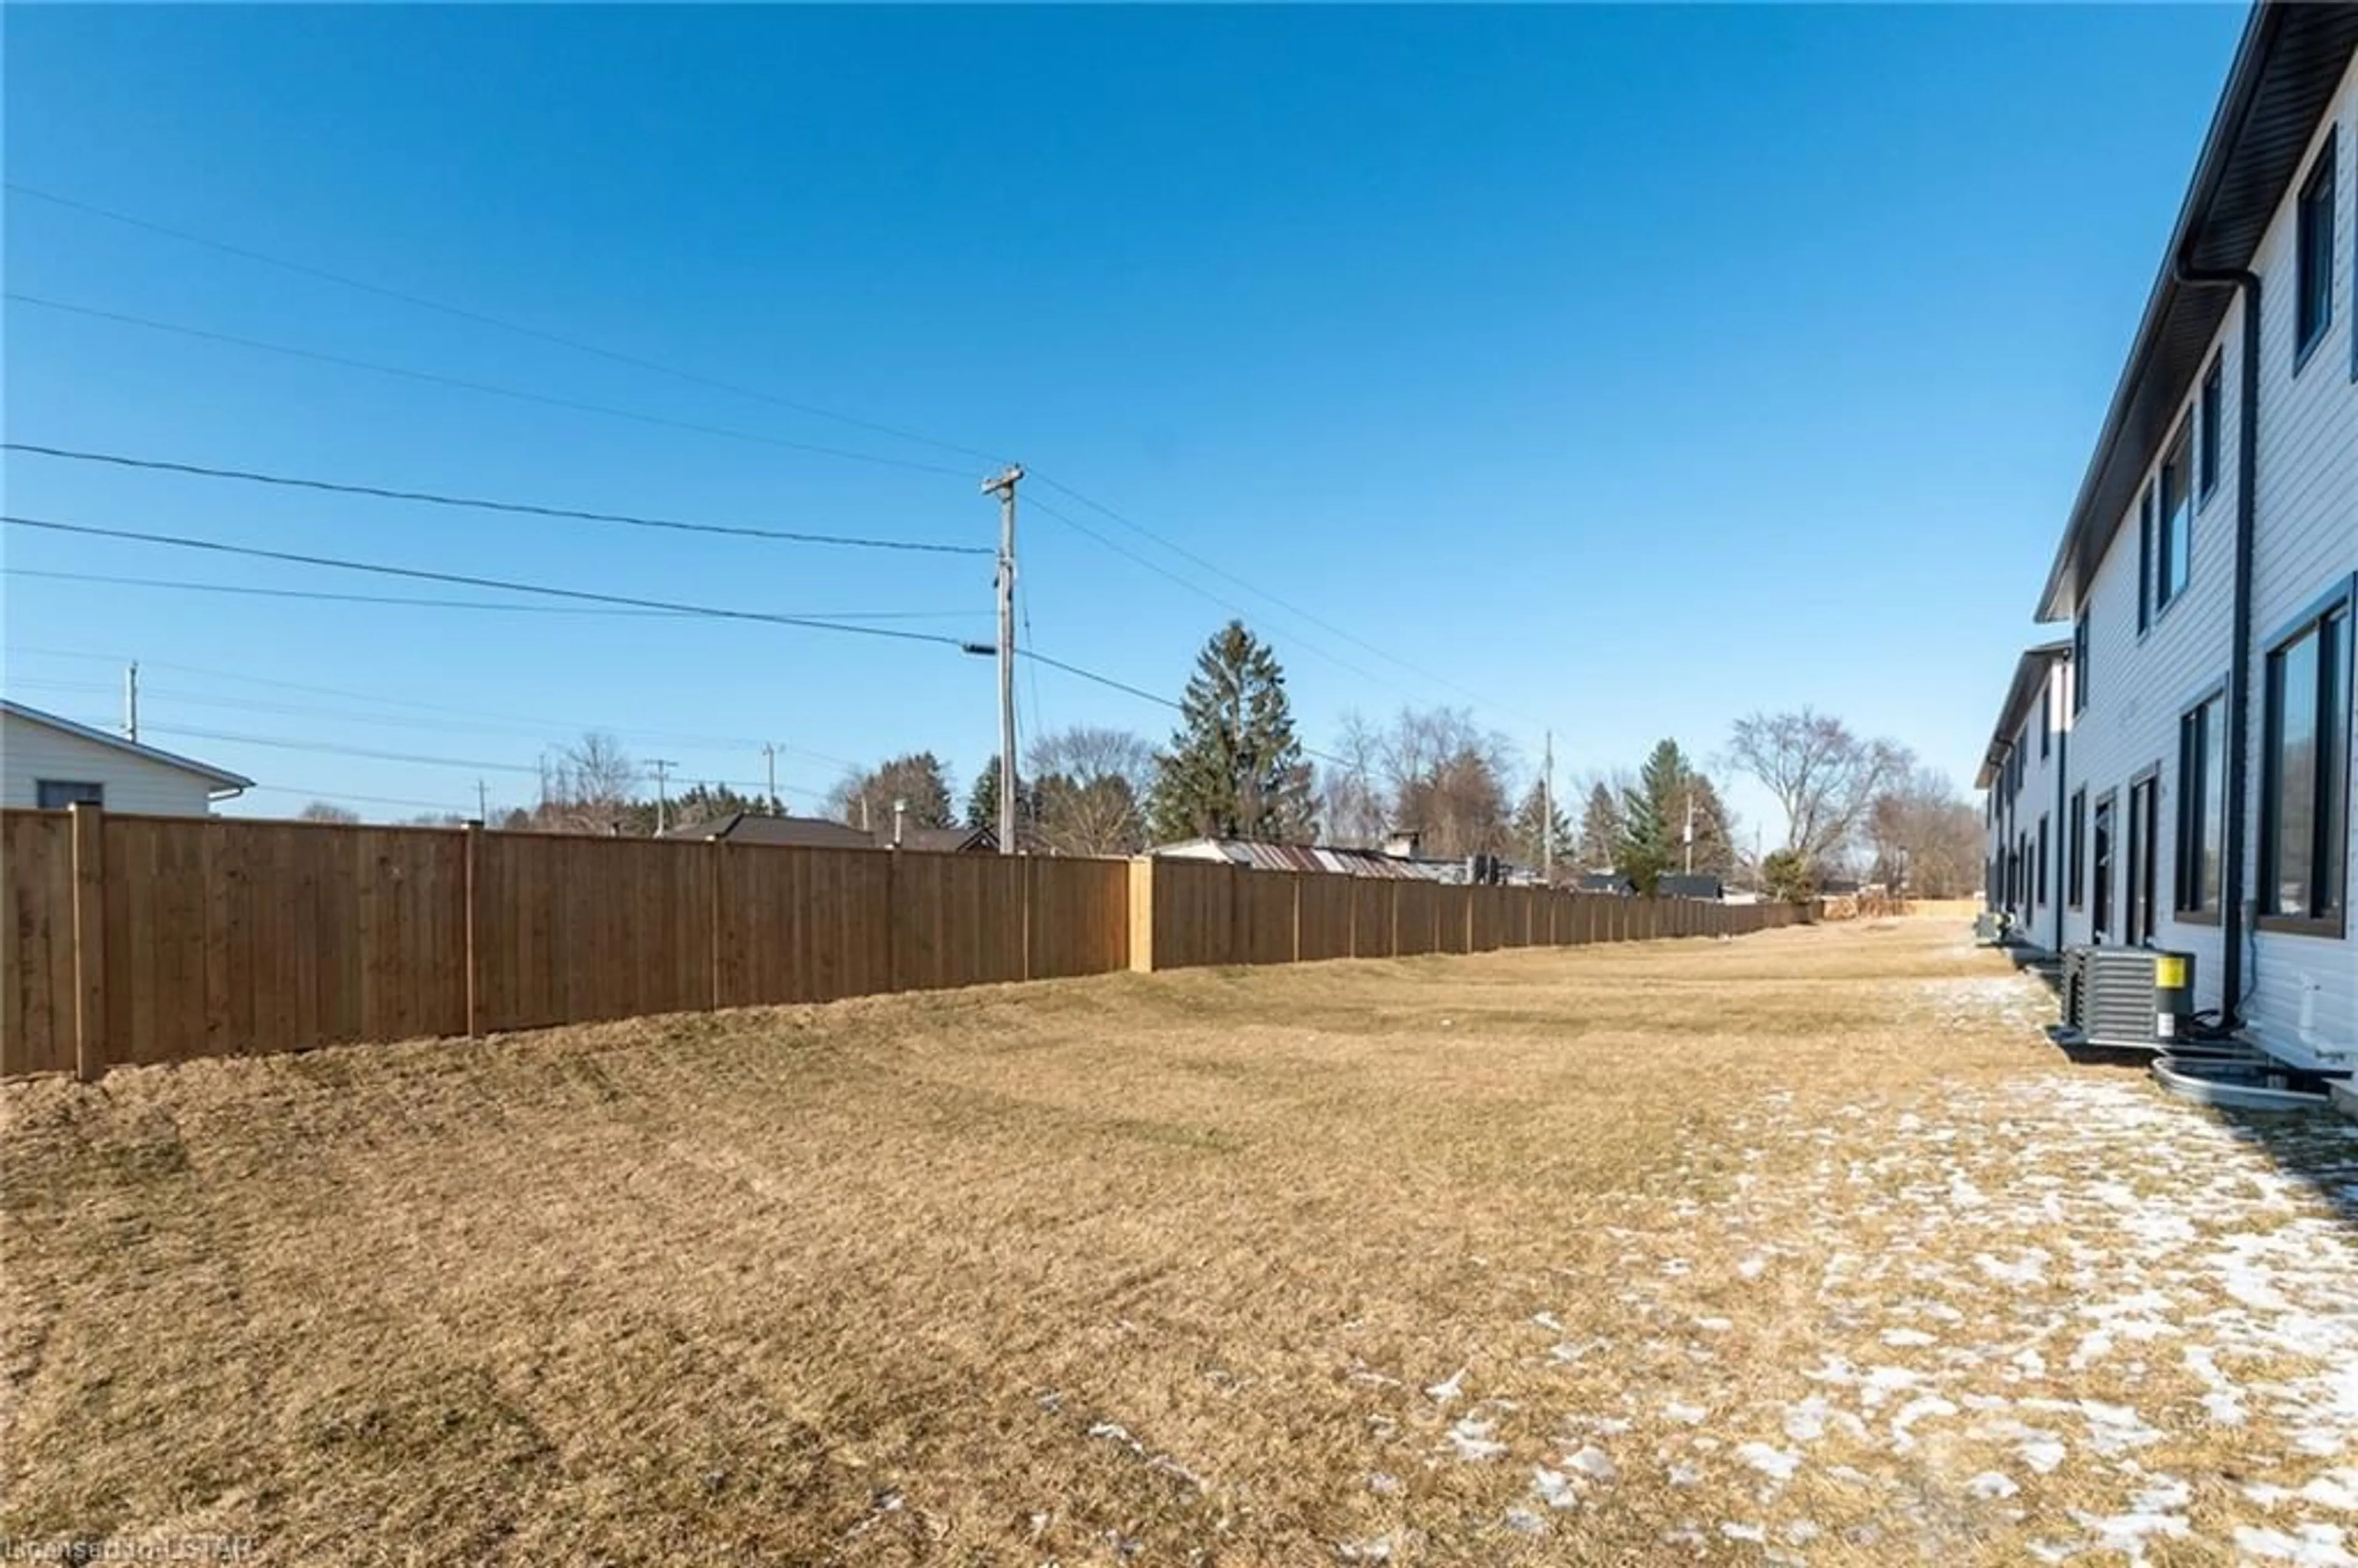 Fenced yard for 101 Swales Ave #43, Strathroy Ontario N7G 1A8